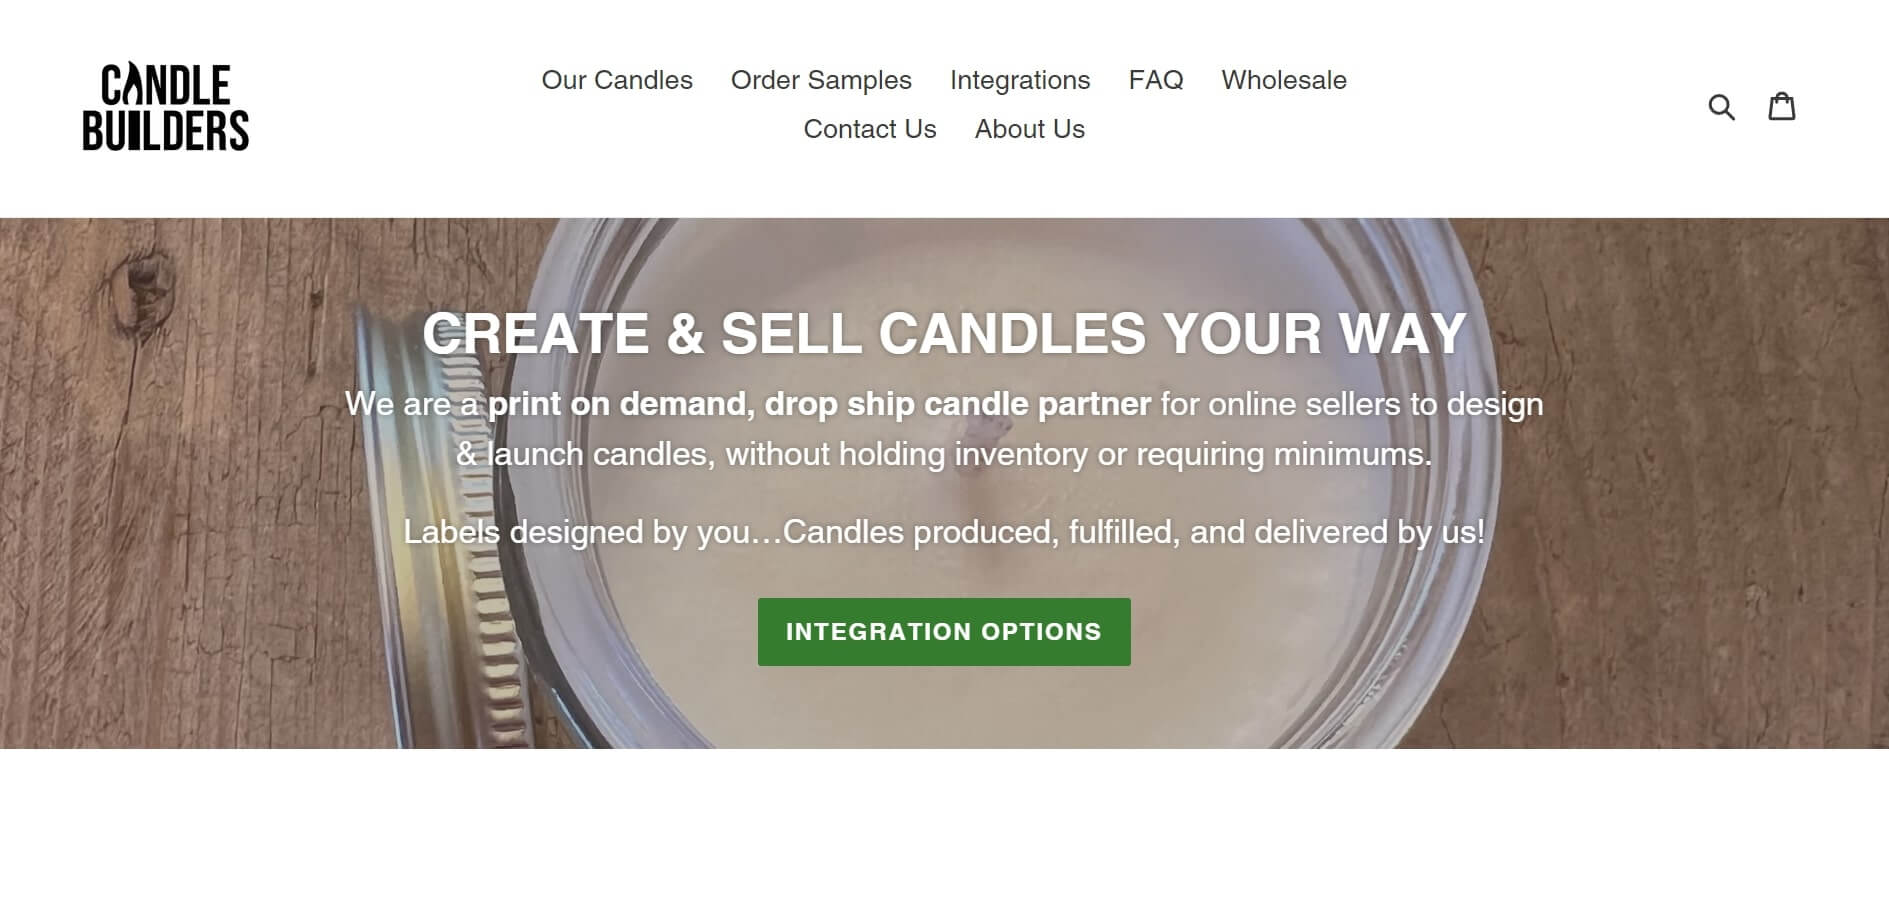 Candle Builders